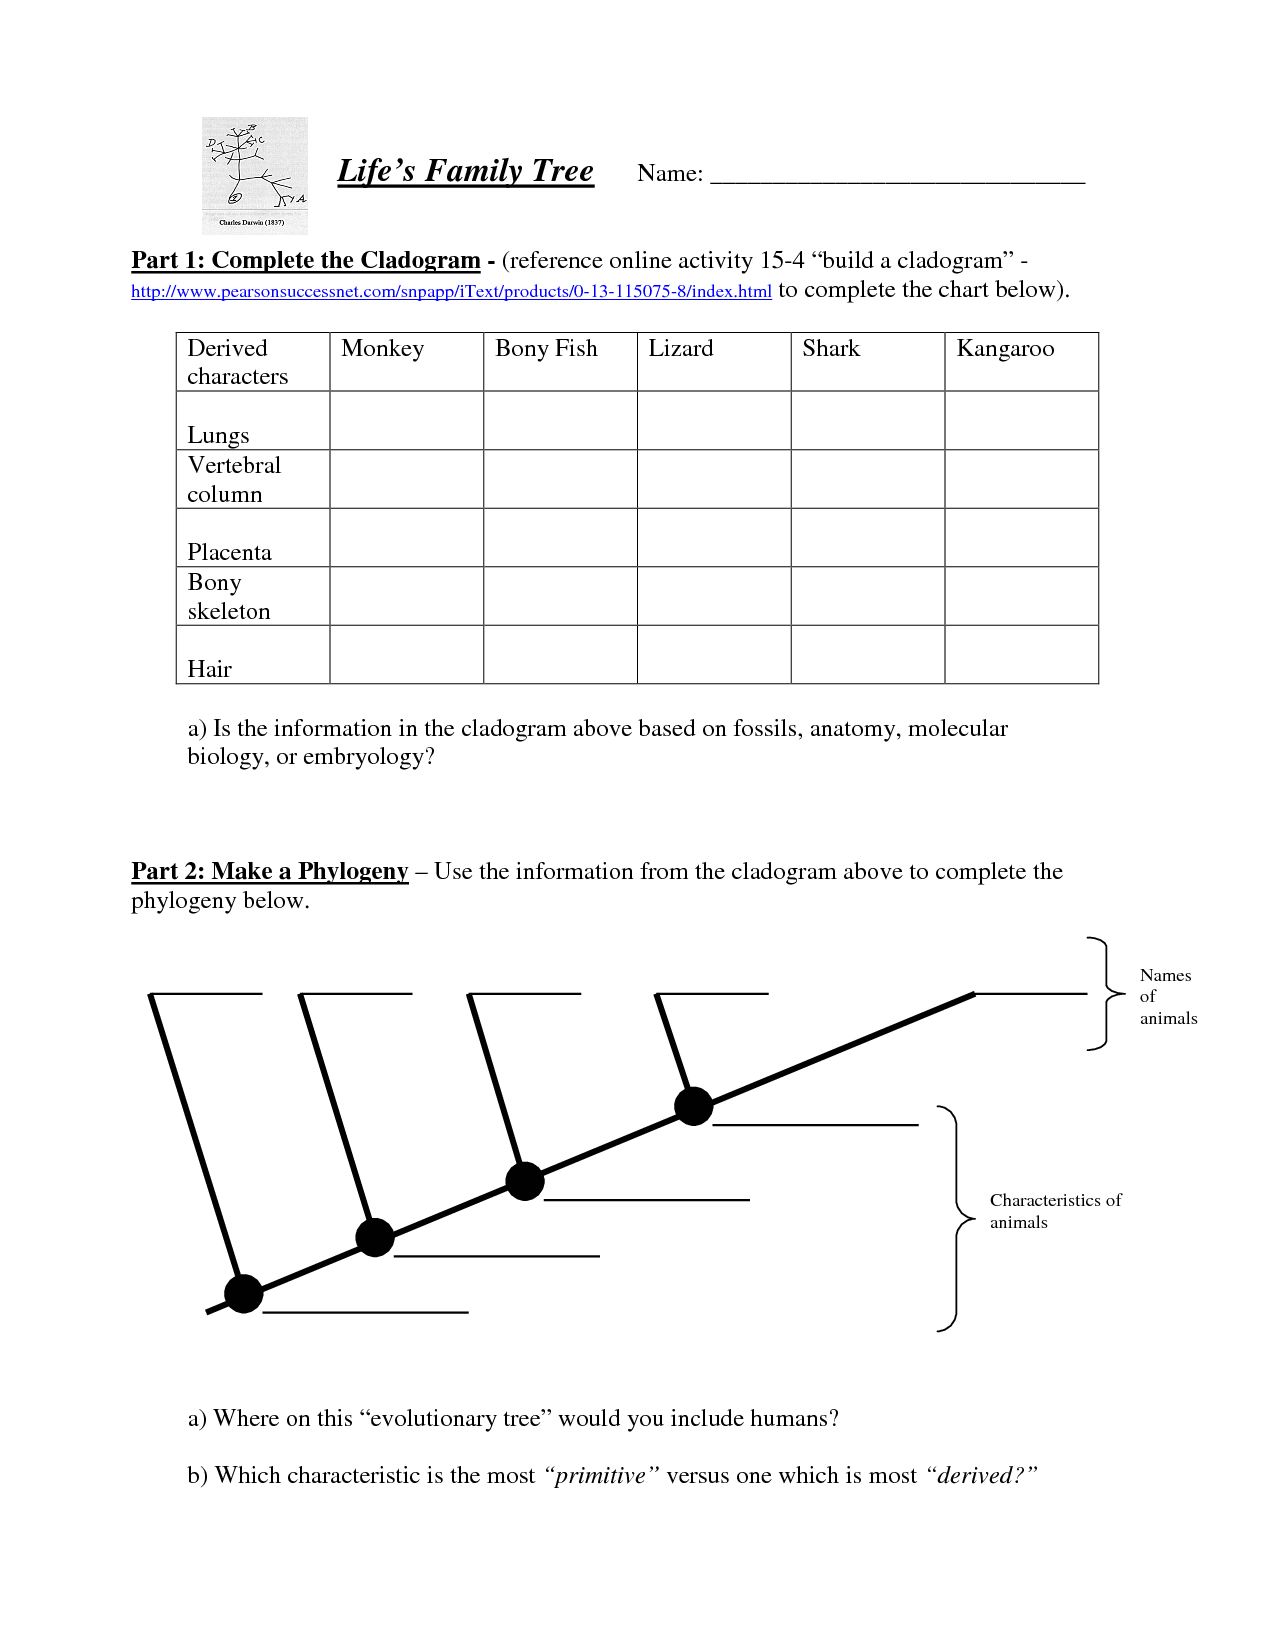 17 Best Images of Direct Variation Worksheet With Answers  Direct and Inverse Variation 